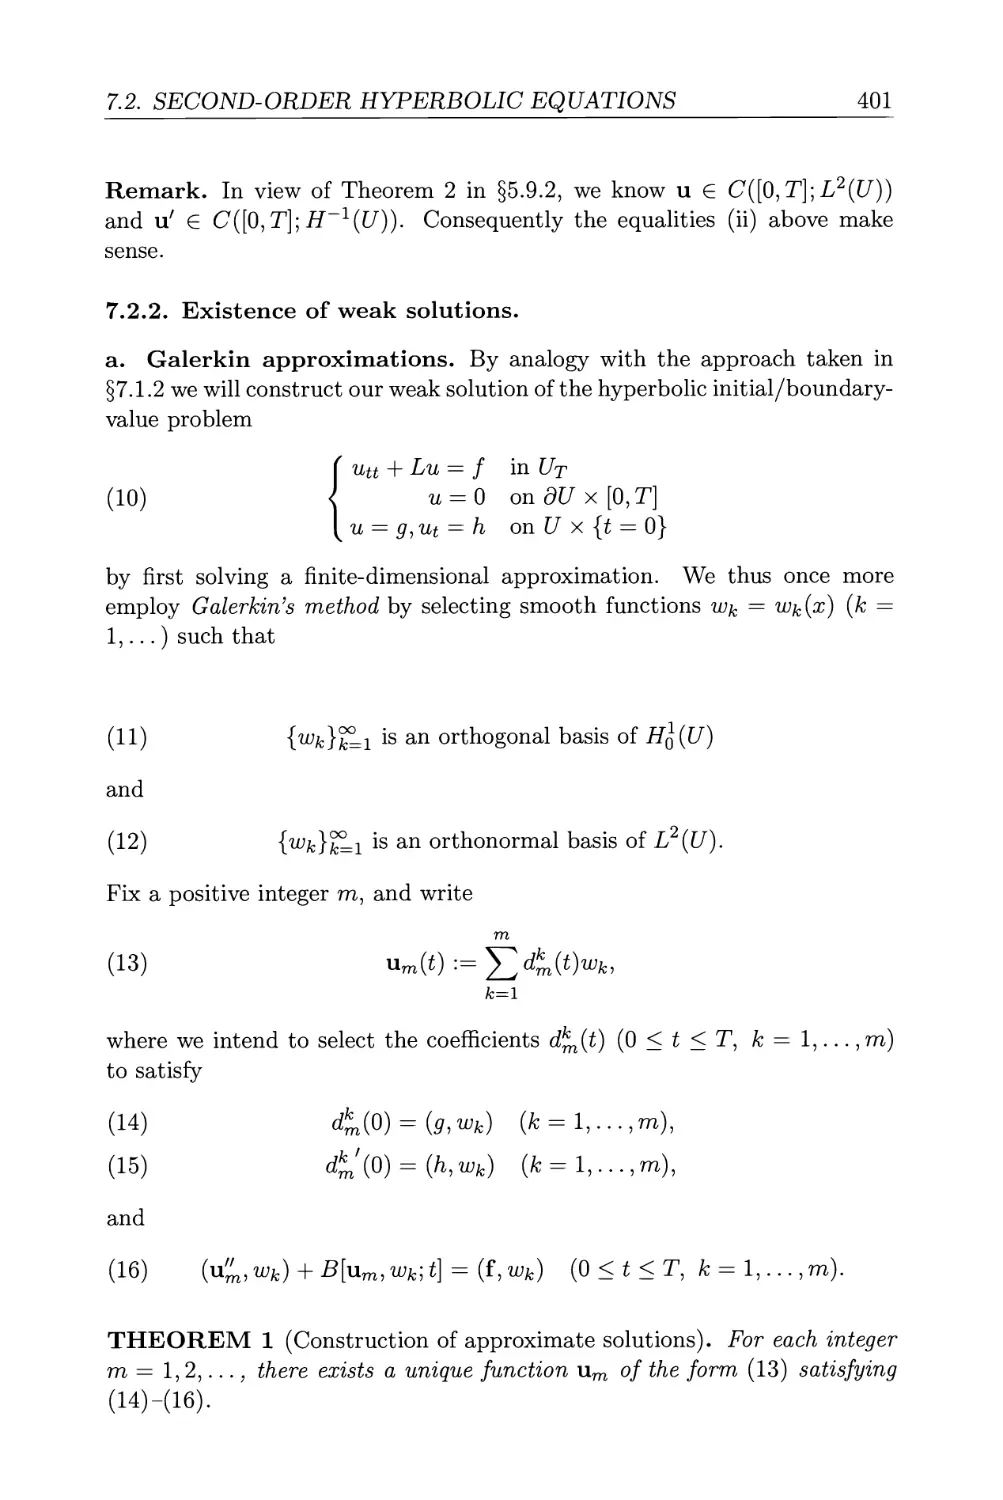 7.2.2. Existence of weak solutions